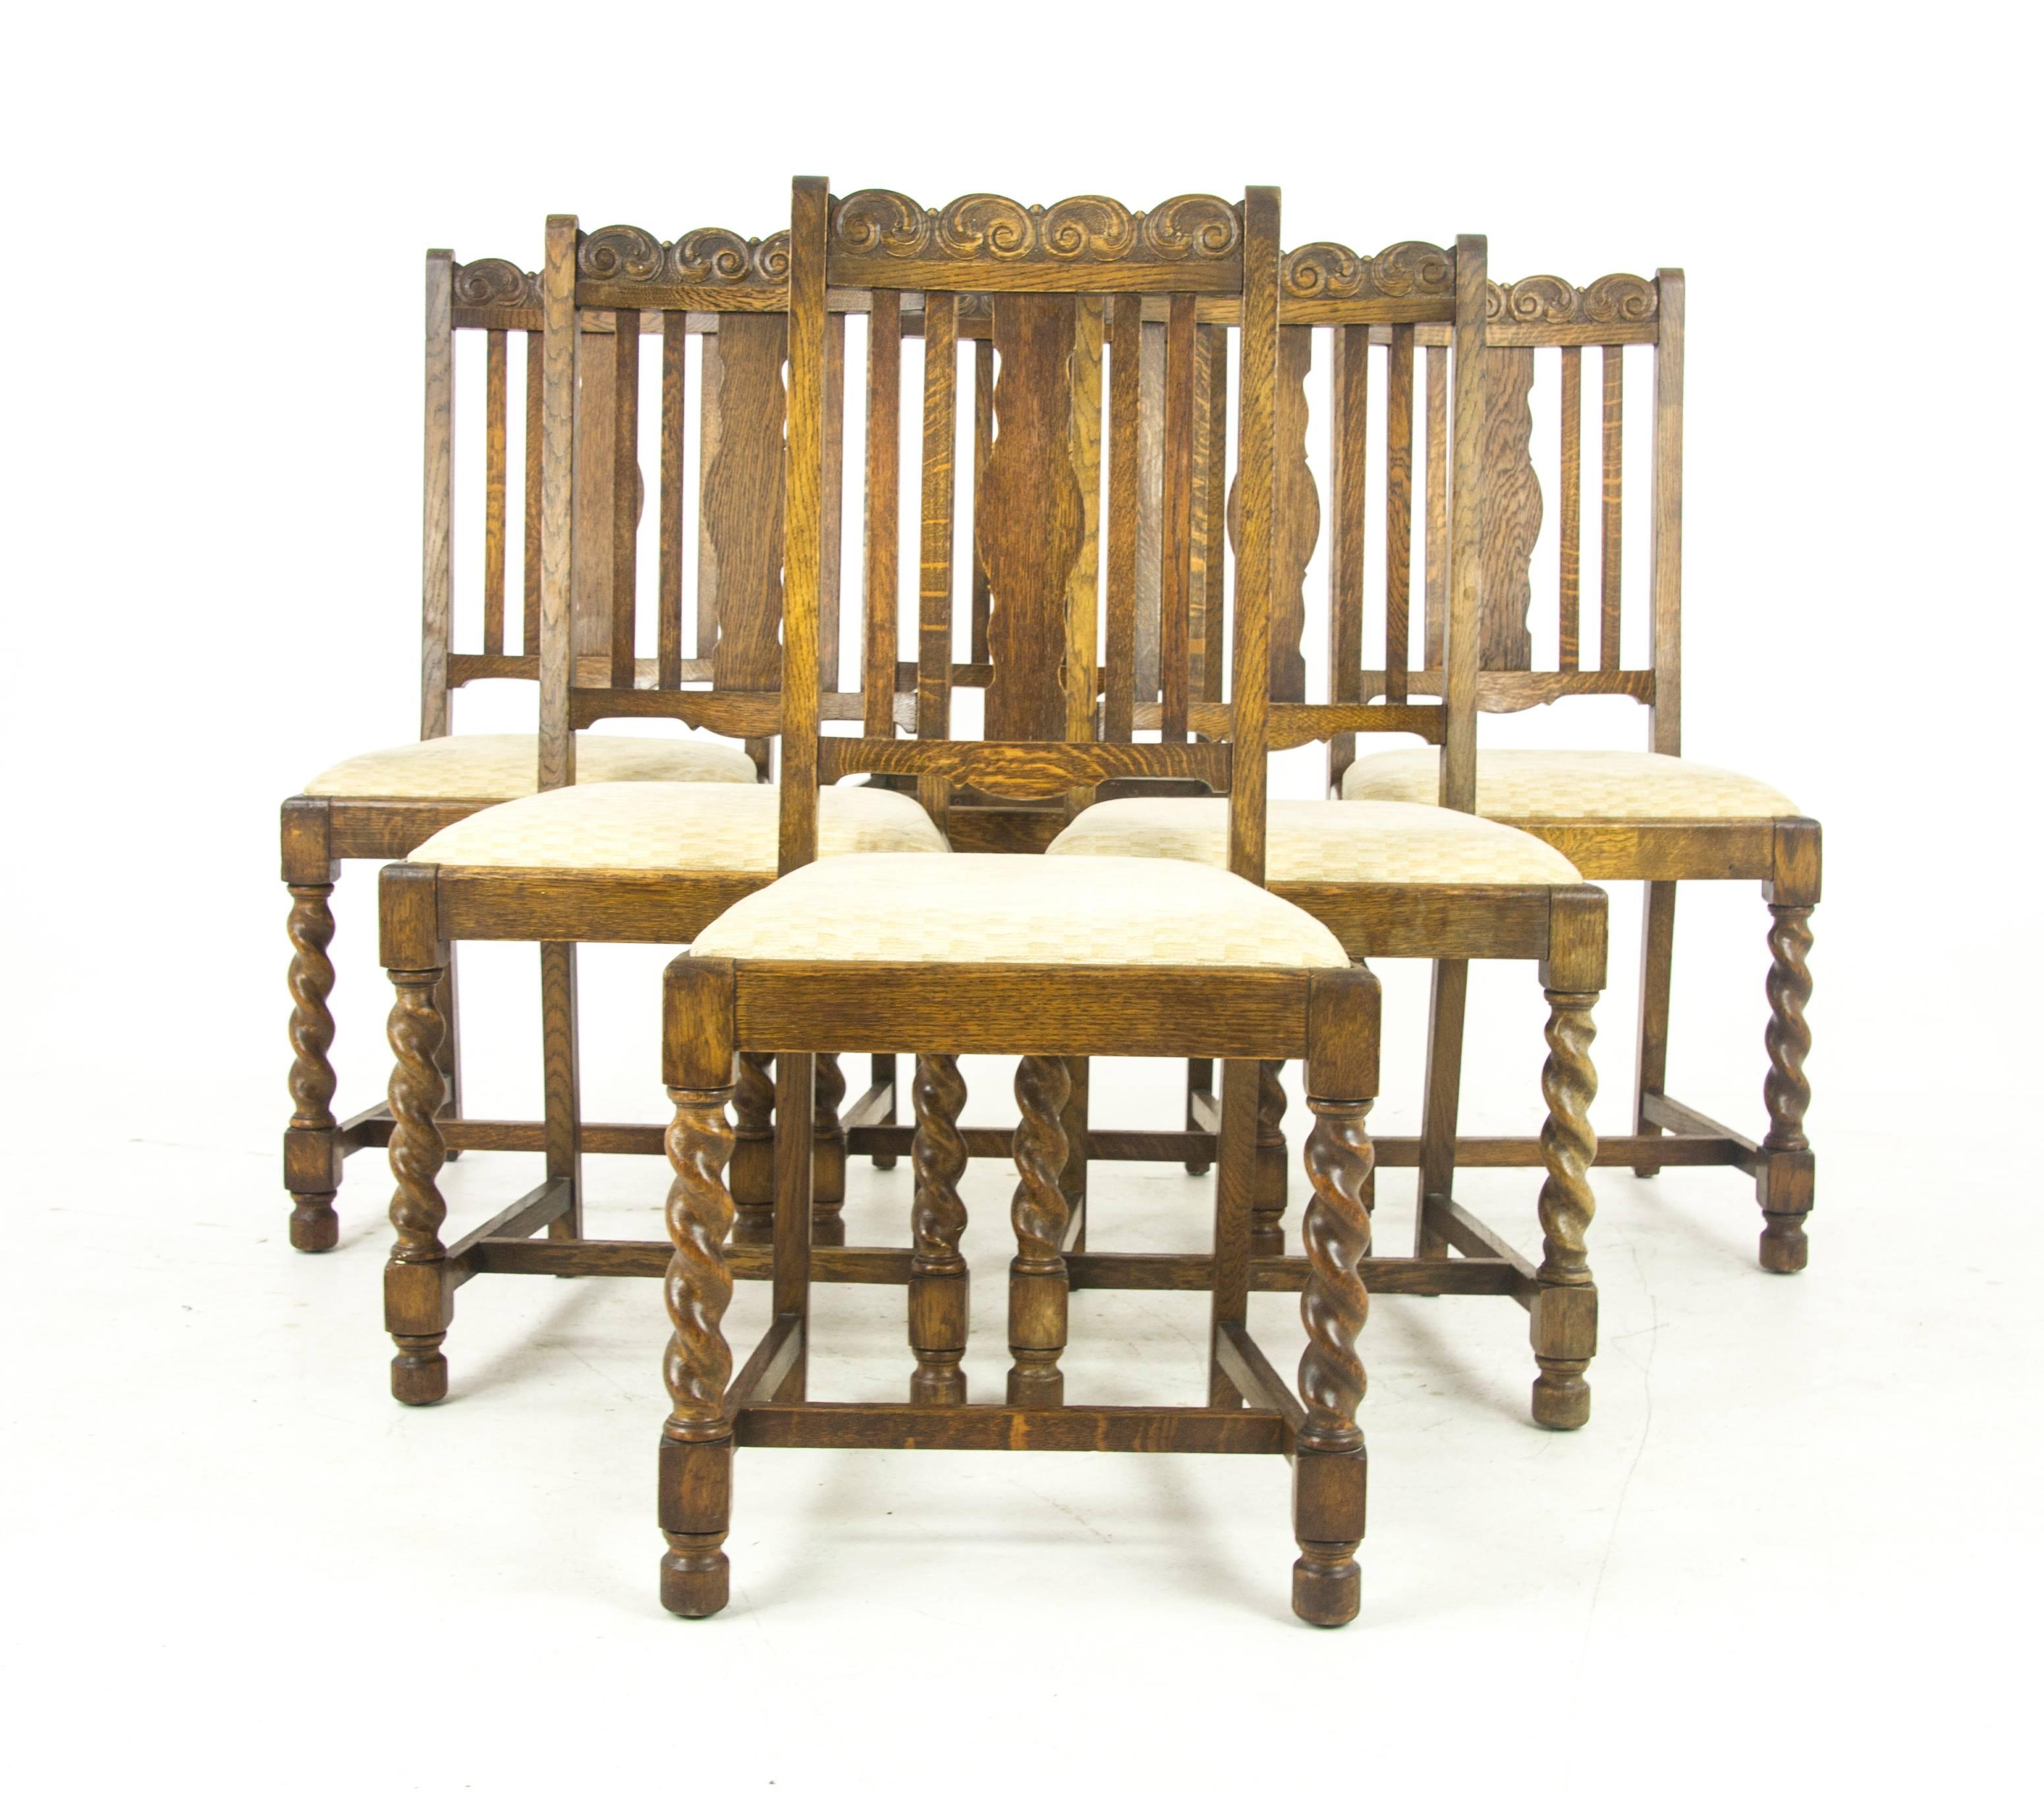 Antique dining chairs six, barley twist oak, Scotland, 1920, Antique Furniture, B1052.

Scotland, 1920.
Solid oak construction
Original finish
Carved top rail
Vertical slats
Upholstered lift out seats (1 missing seat)
Supported by thick